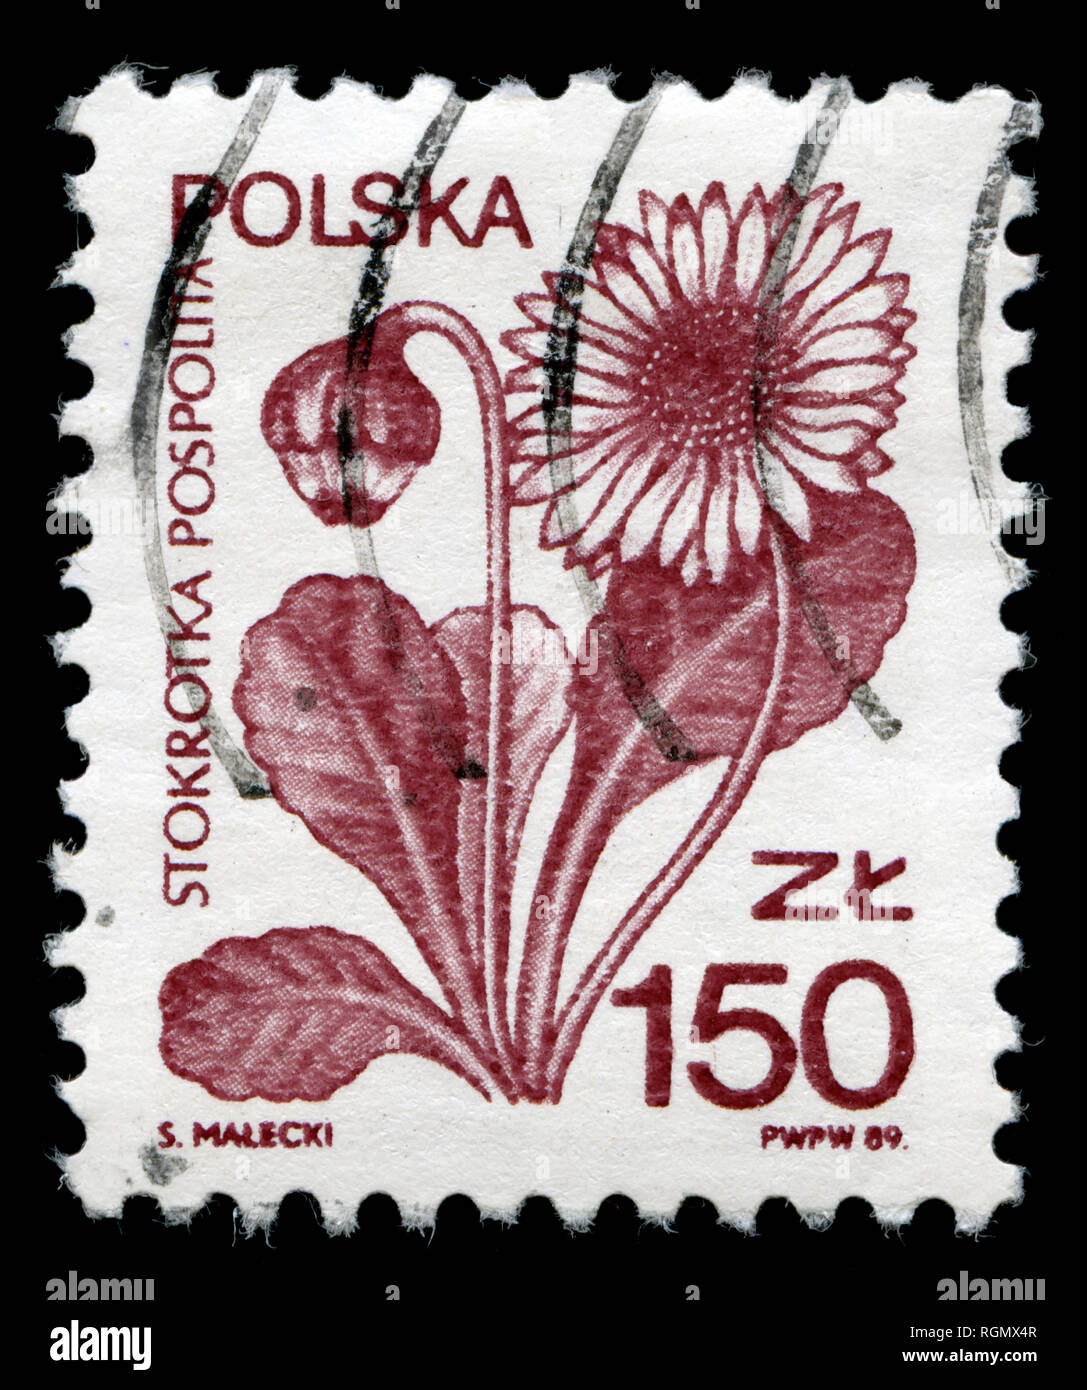 Postage stamp from the Poland in the Medicinal Plants series issued in 1989 Stock Photo